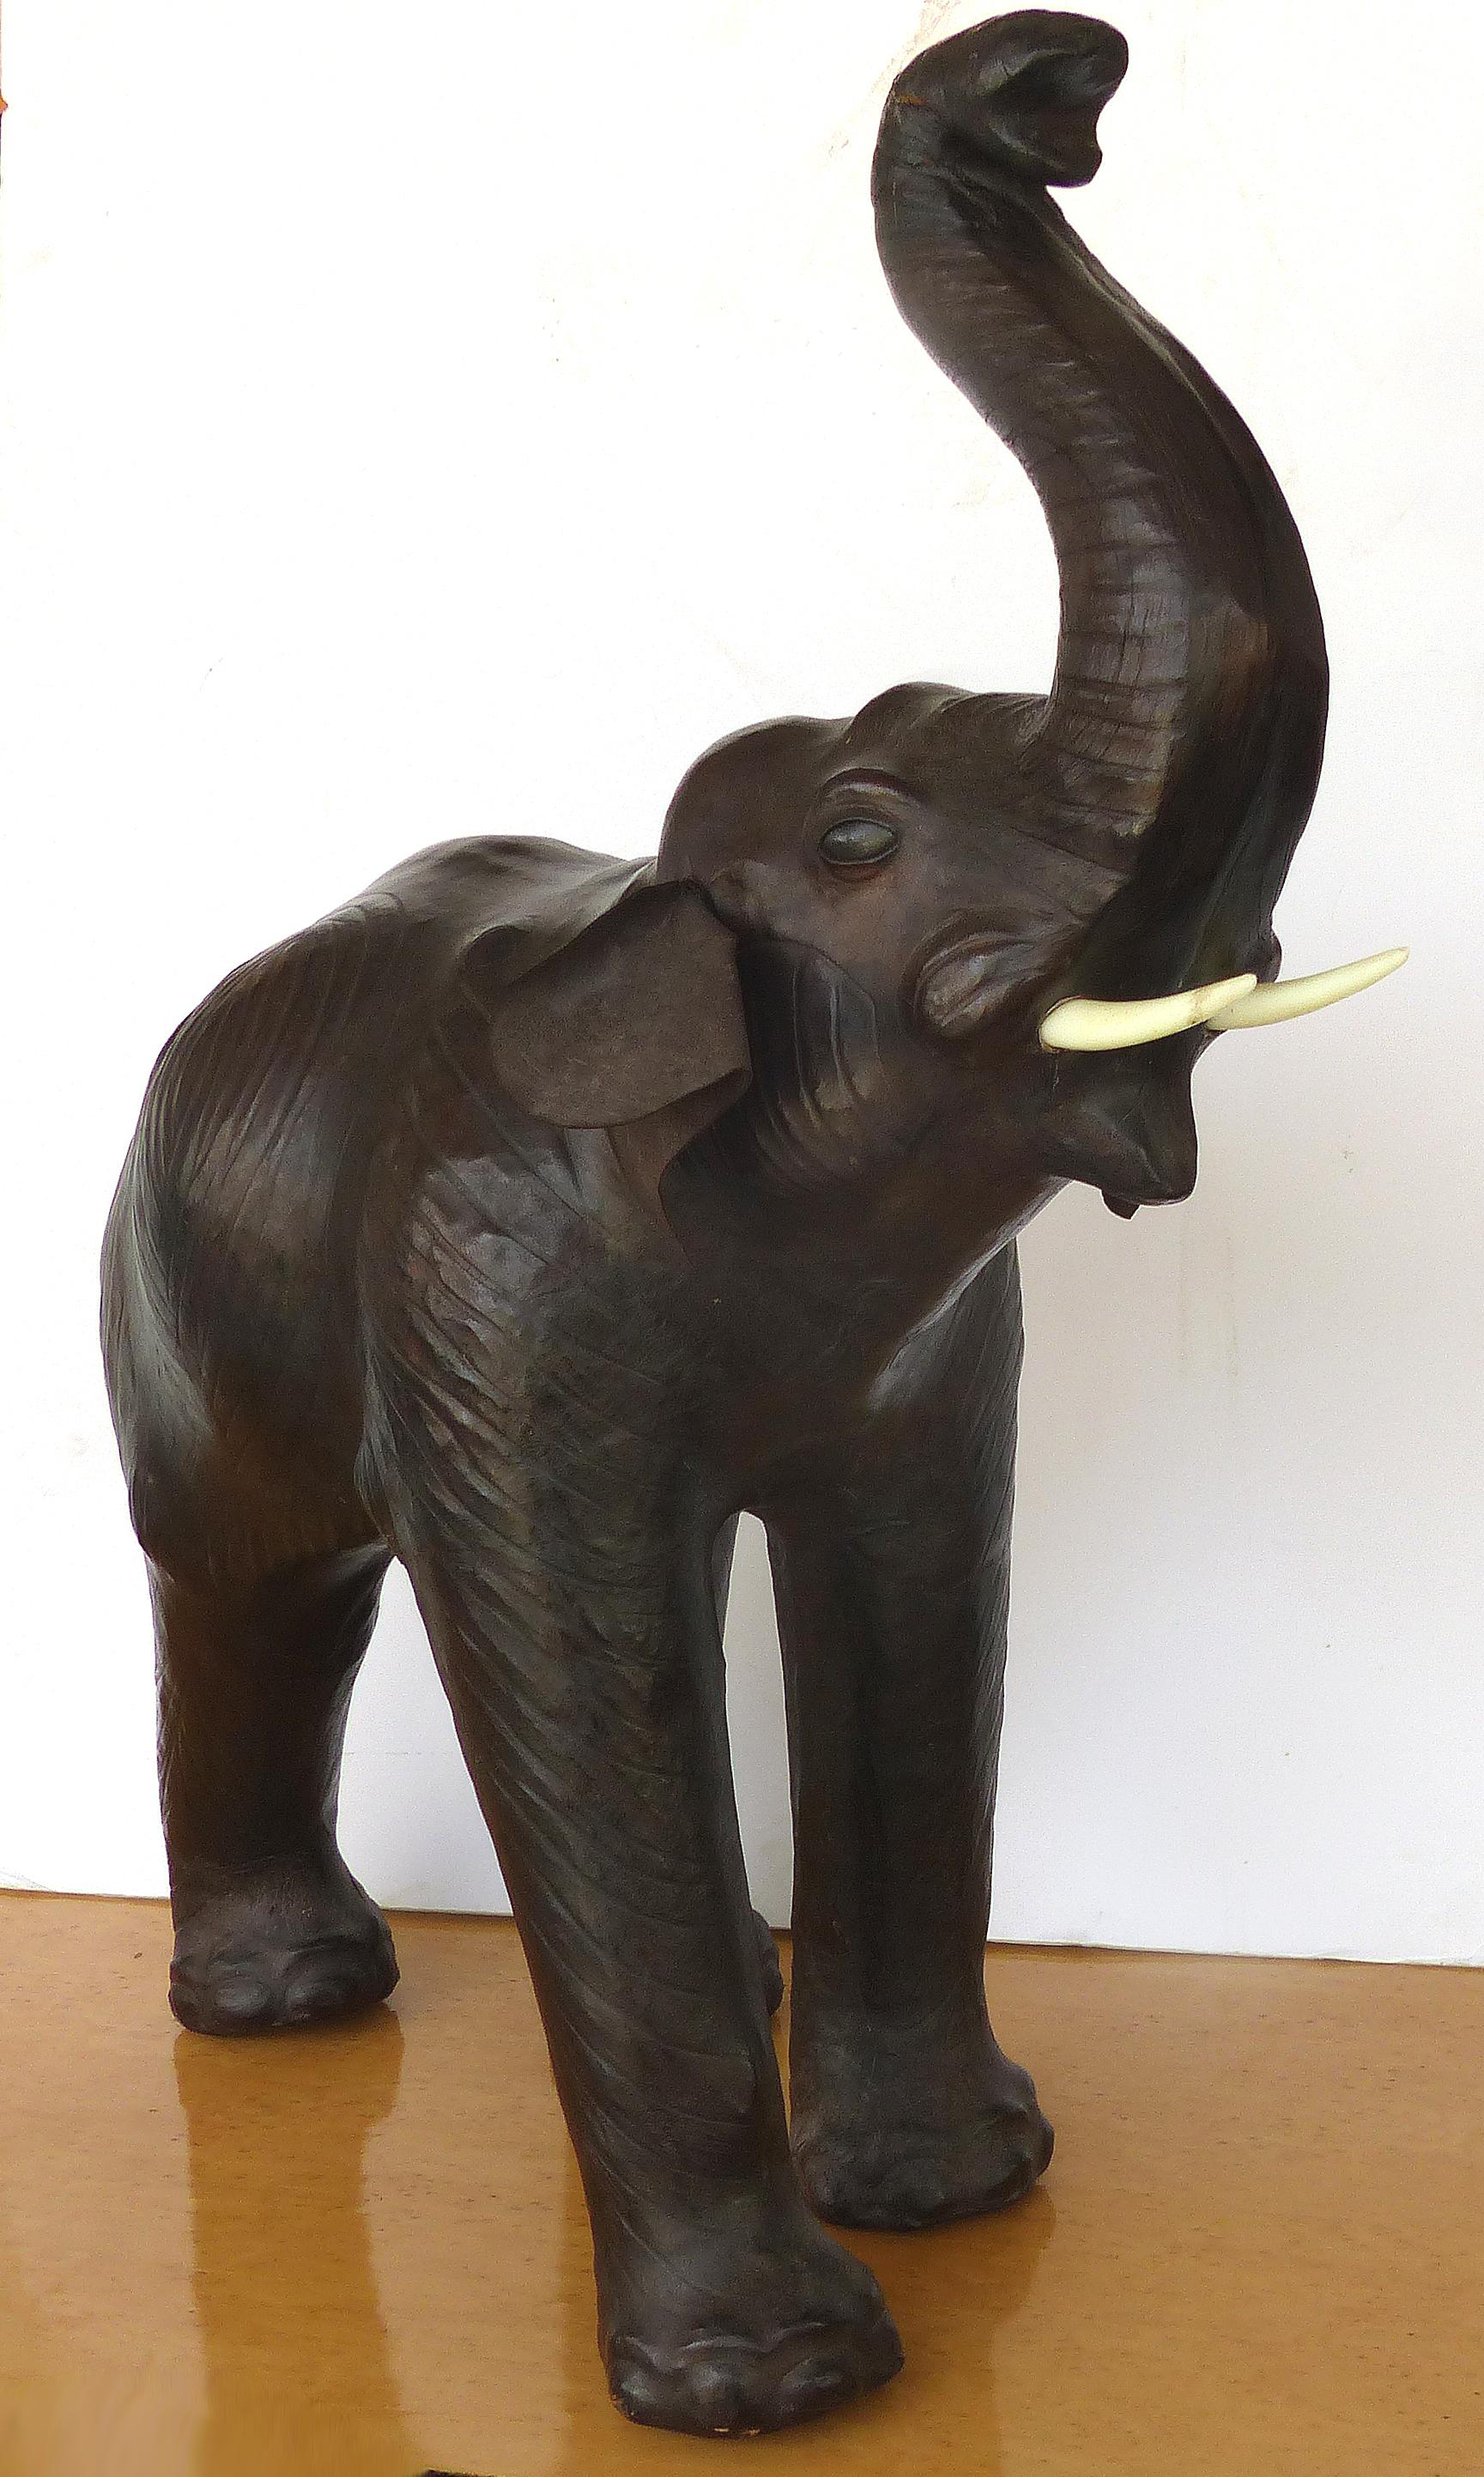 Leather-Clad Sculpture of an Elephant

Offered for sale is a finely detailed leather clad sculpture of an elephant. The elephant has inset glass eyes and a leather tail and ears. The body of the elephant is tooled leather which outlines all of the